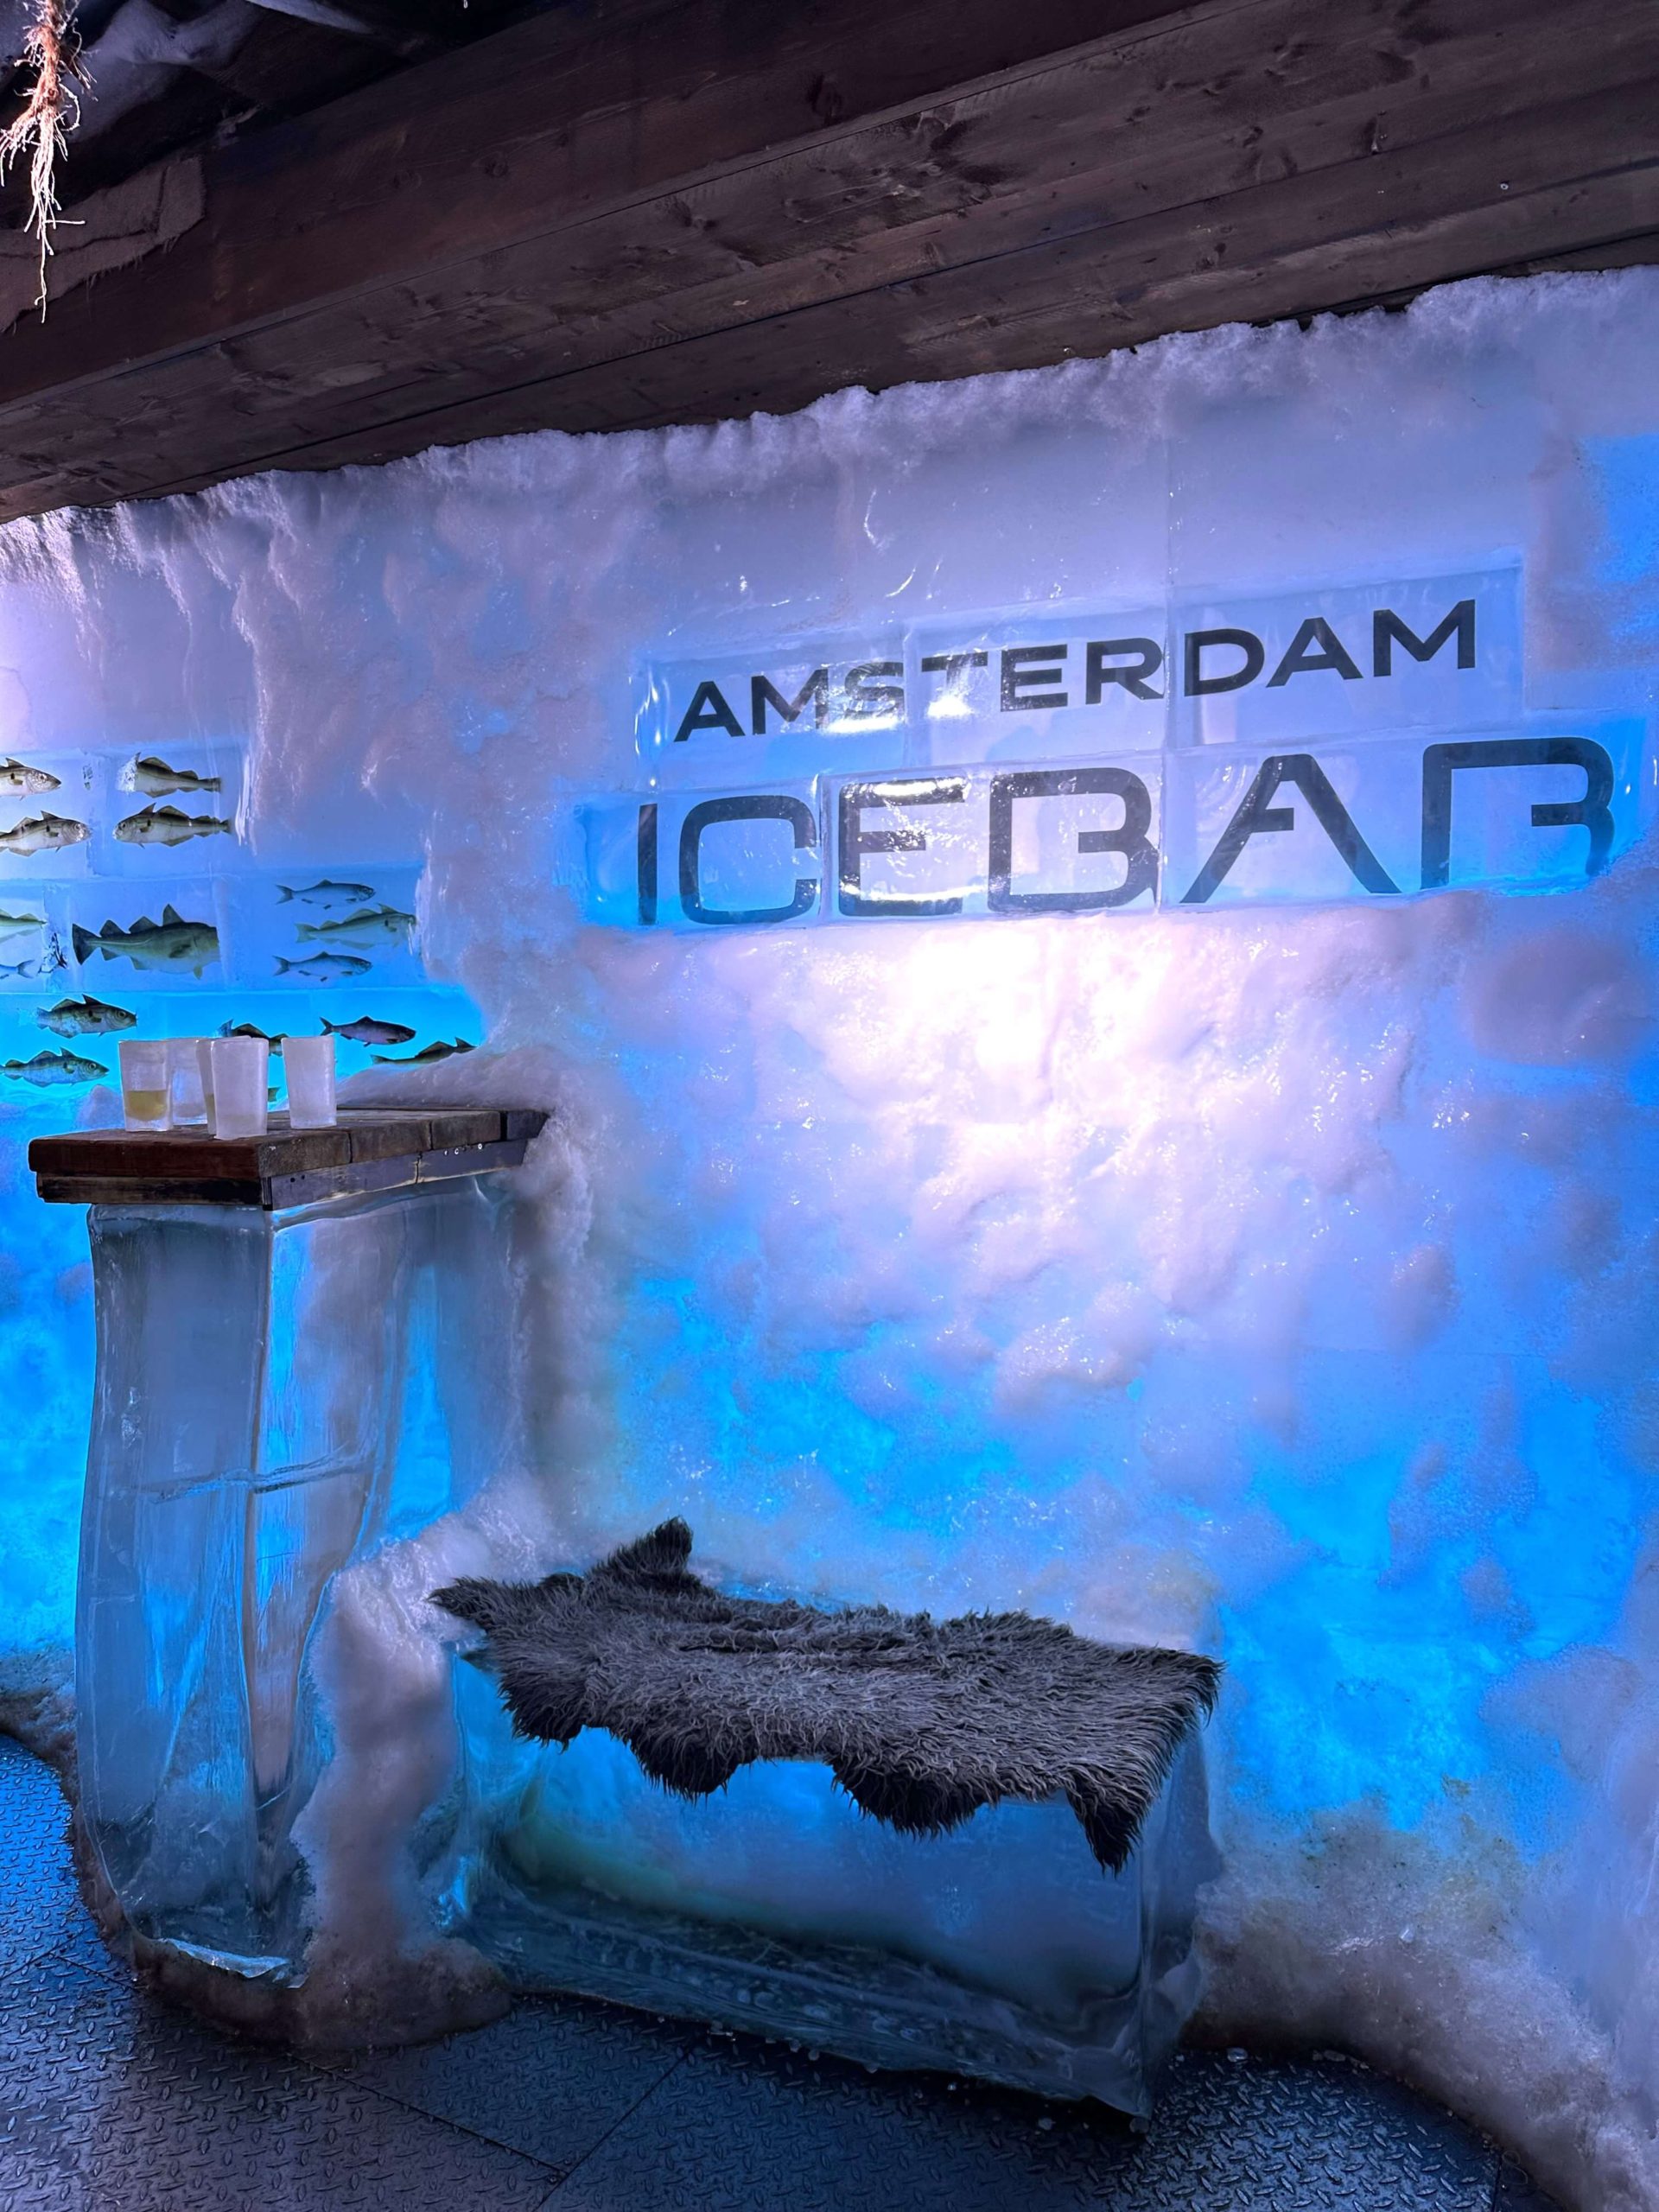 The inside of the Amsterdam Icebar.